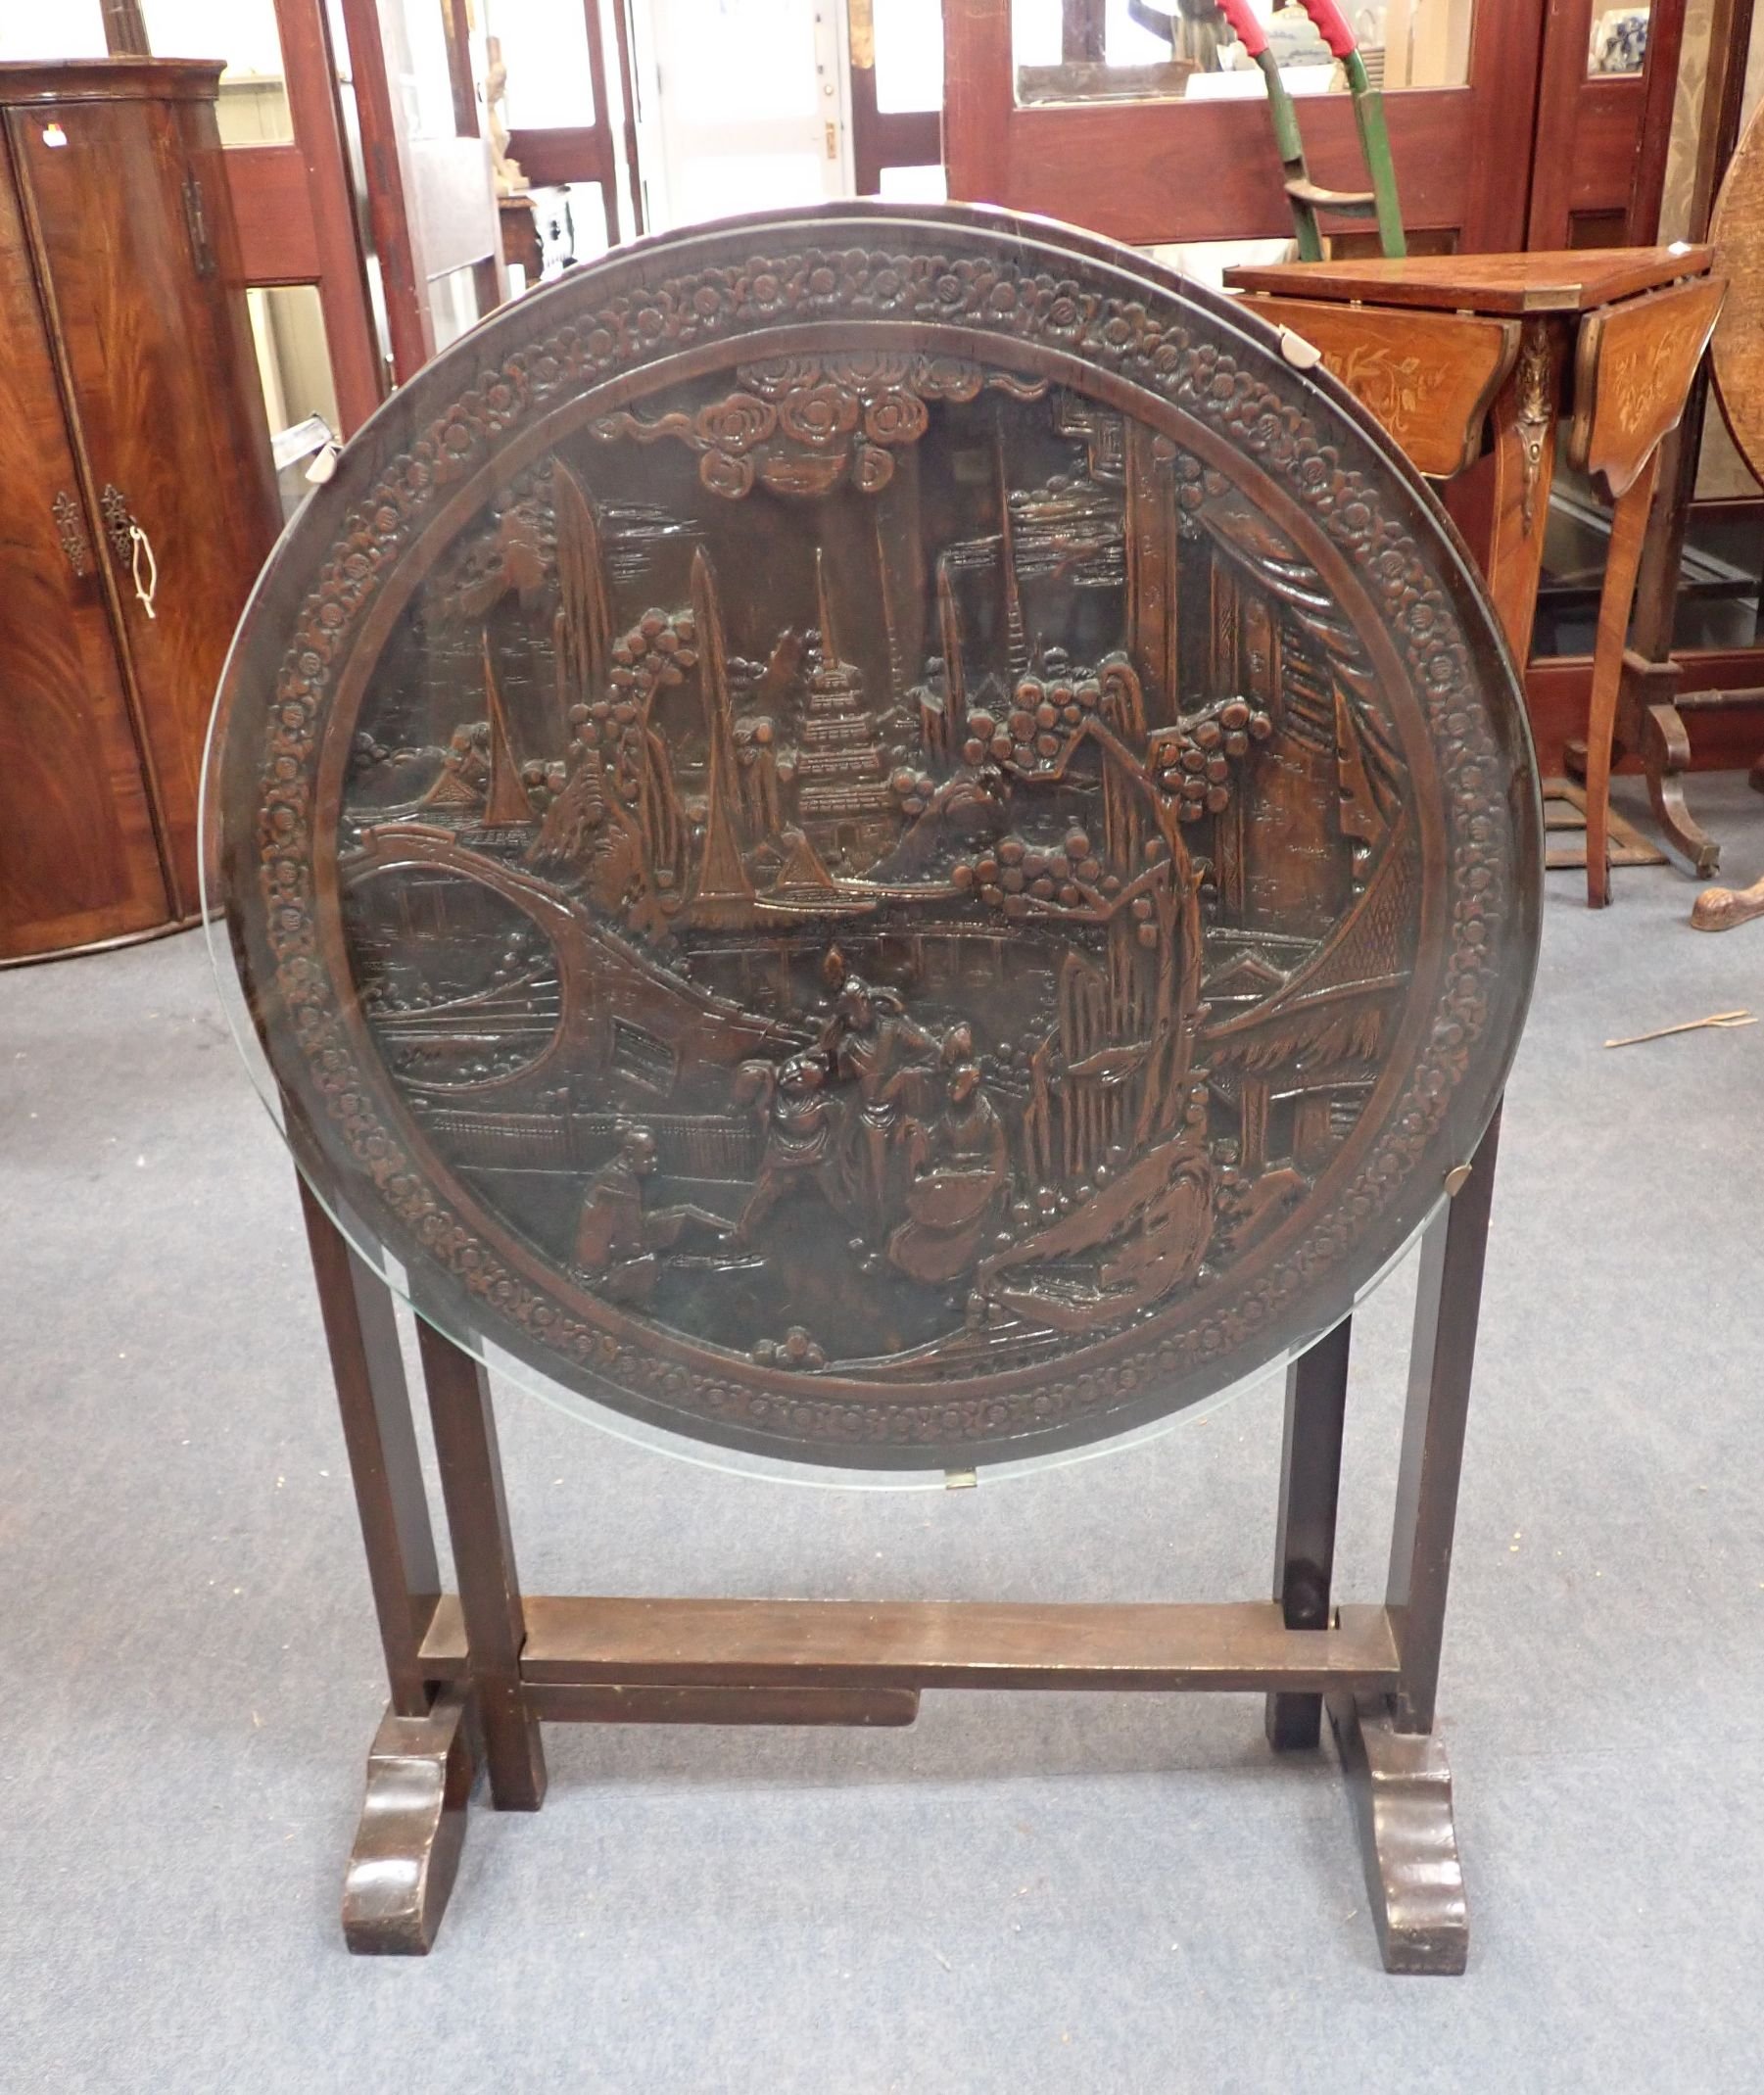 A CARVED HARDWOOD CHINESE TABLE - Image 2 of 2